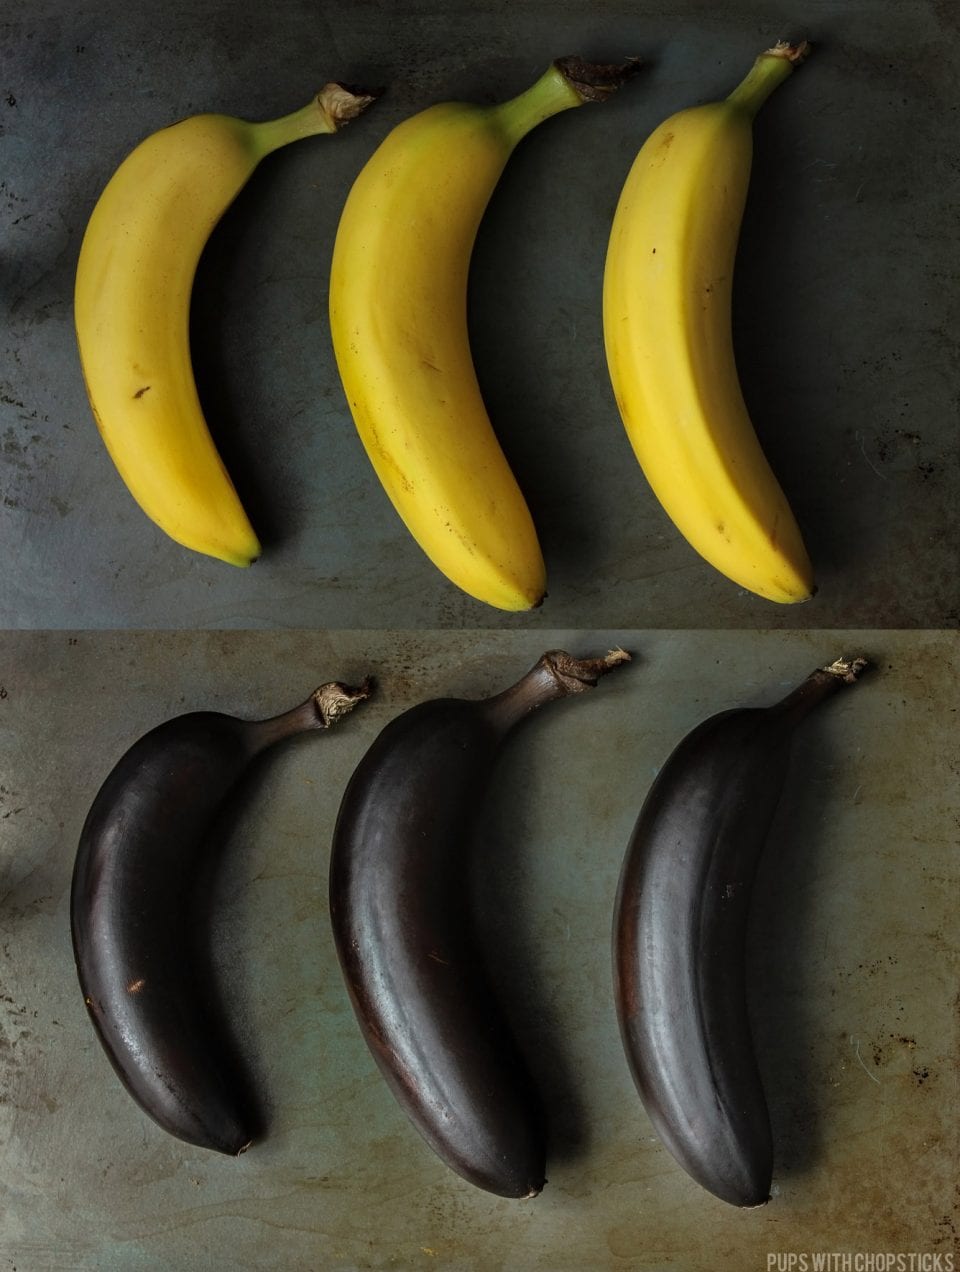 Yellow bananas roasted in the oven to show the difference in color